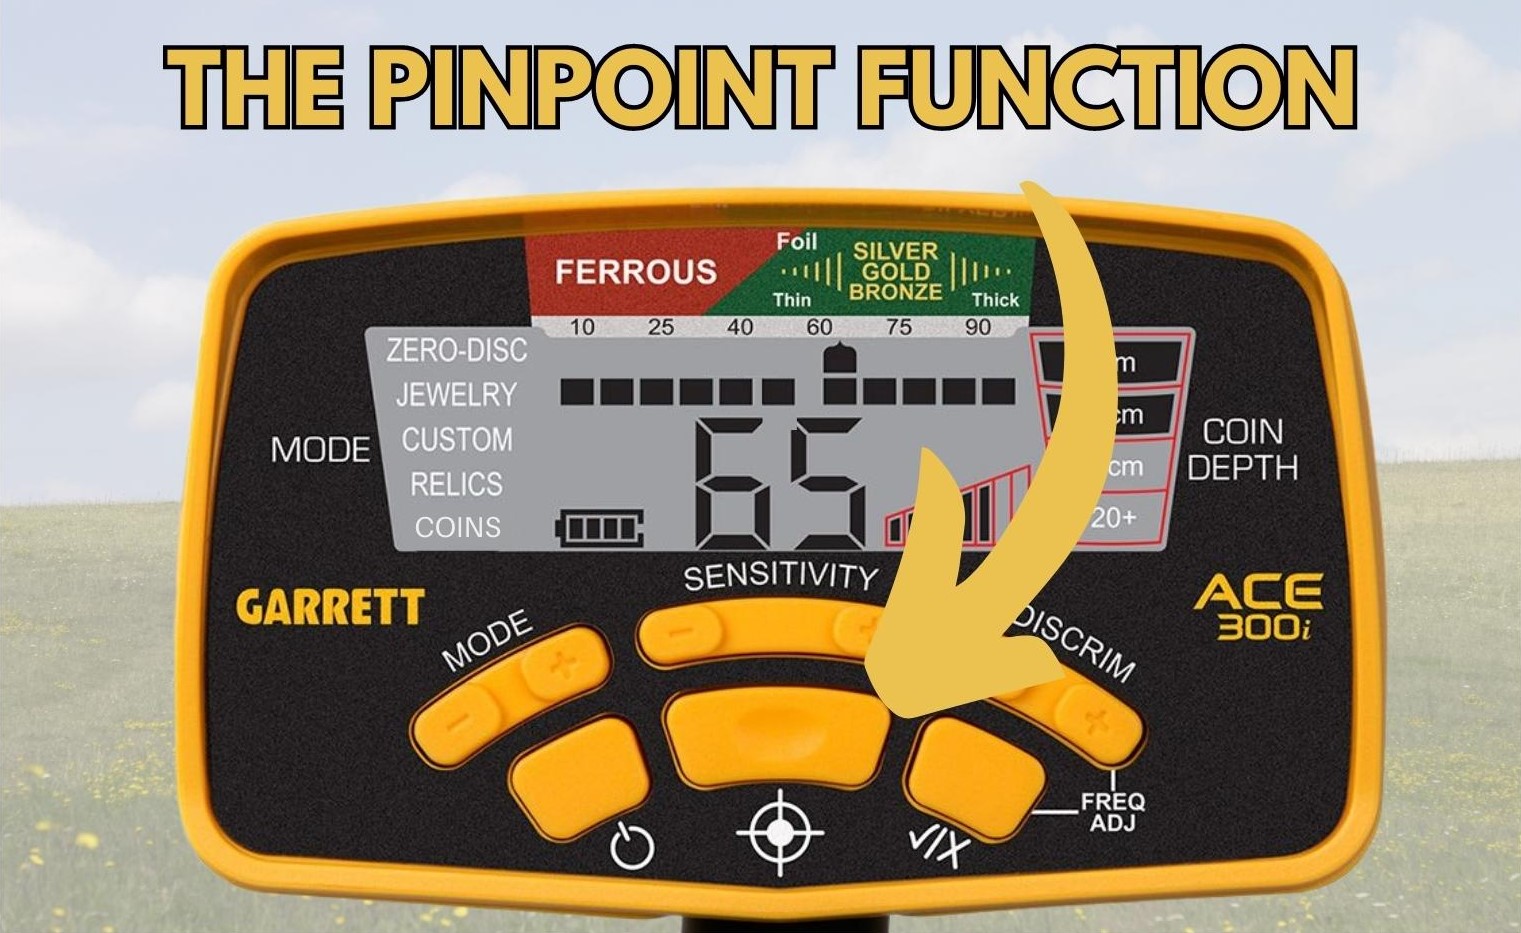 The pinpoint function of the Garret Ace 300.